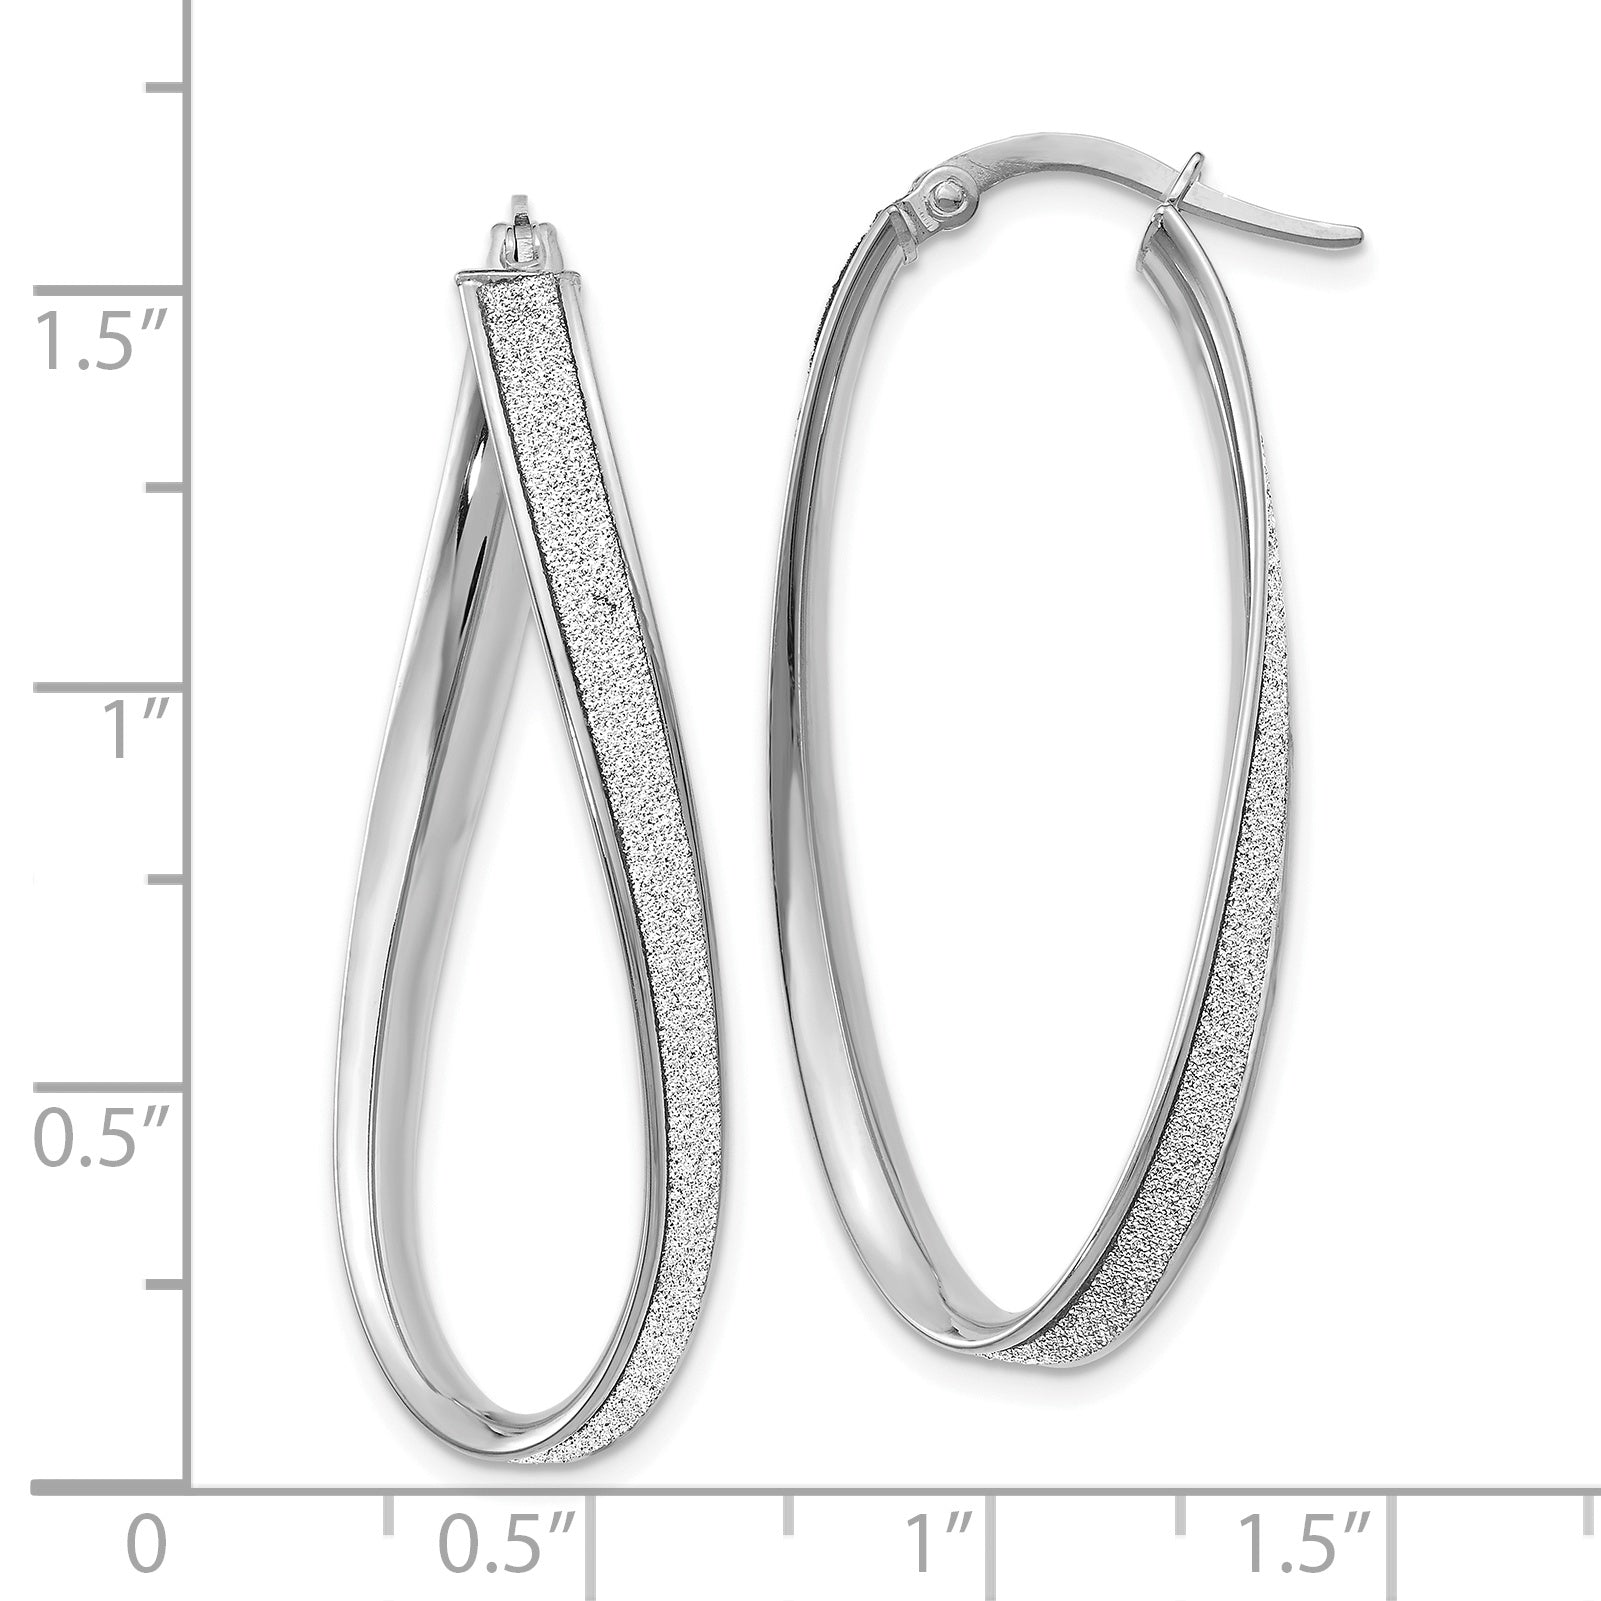 14K White Gold Polished Glimmer Infused Oval Hoop Earrings